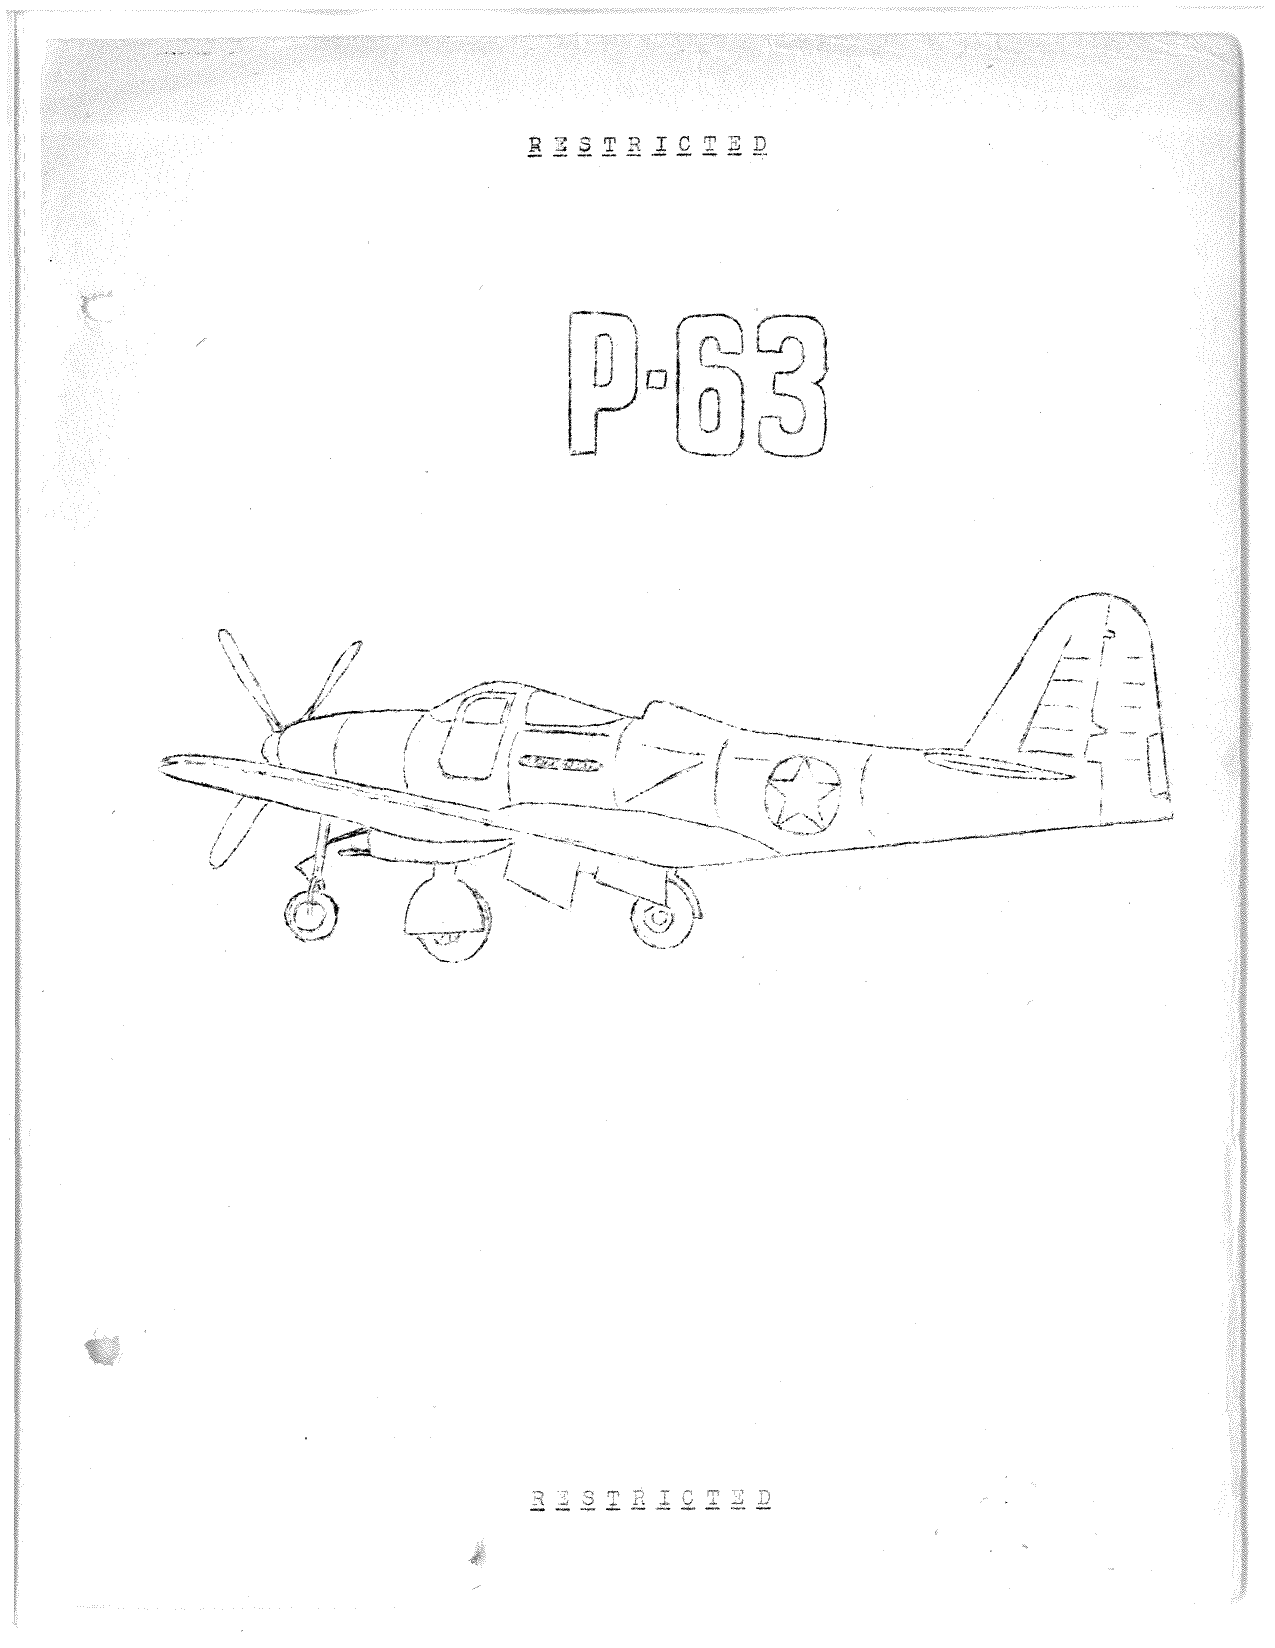 Sample page 1 from AirCorps Library document: Pre-Flight Curriculum for P-63 